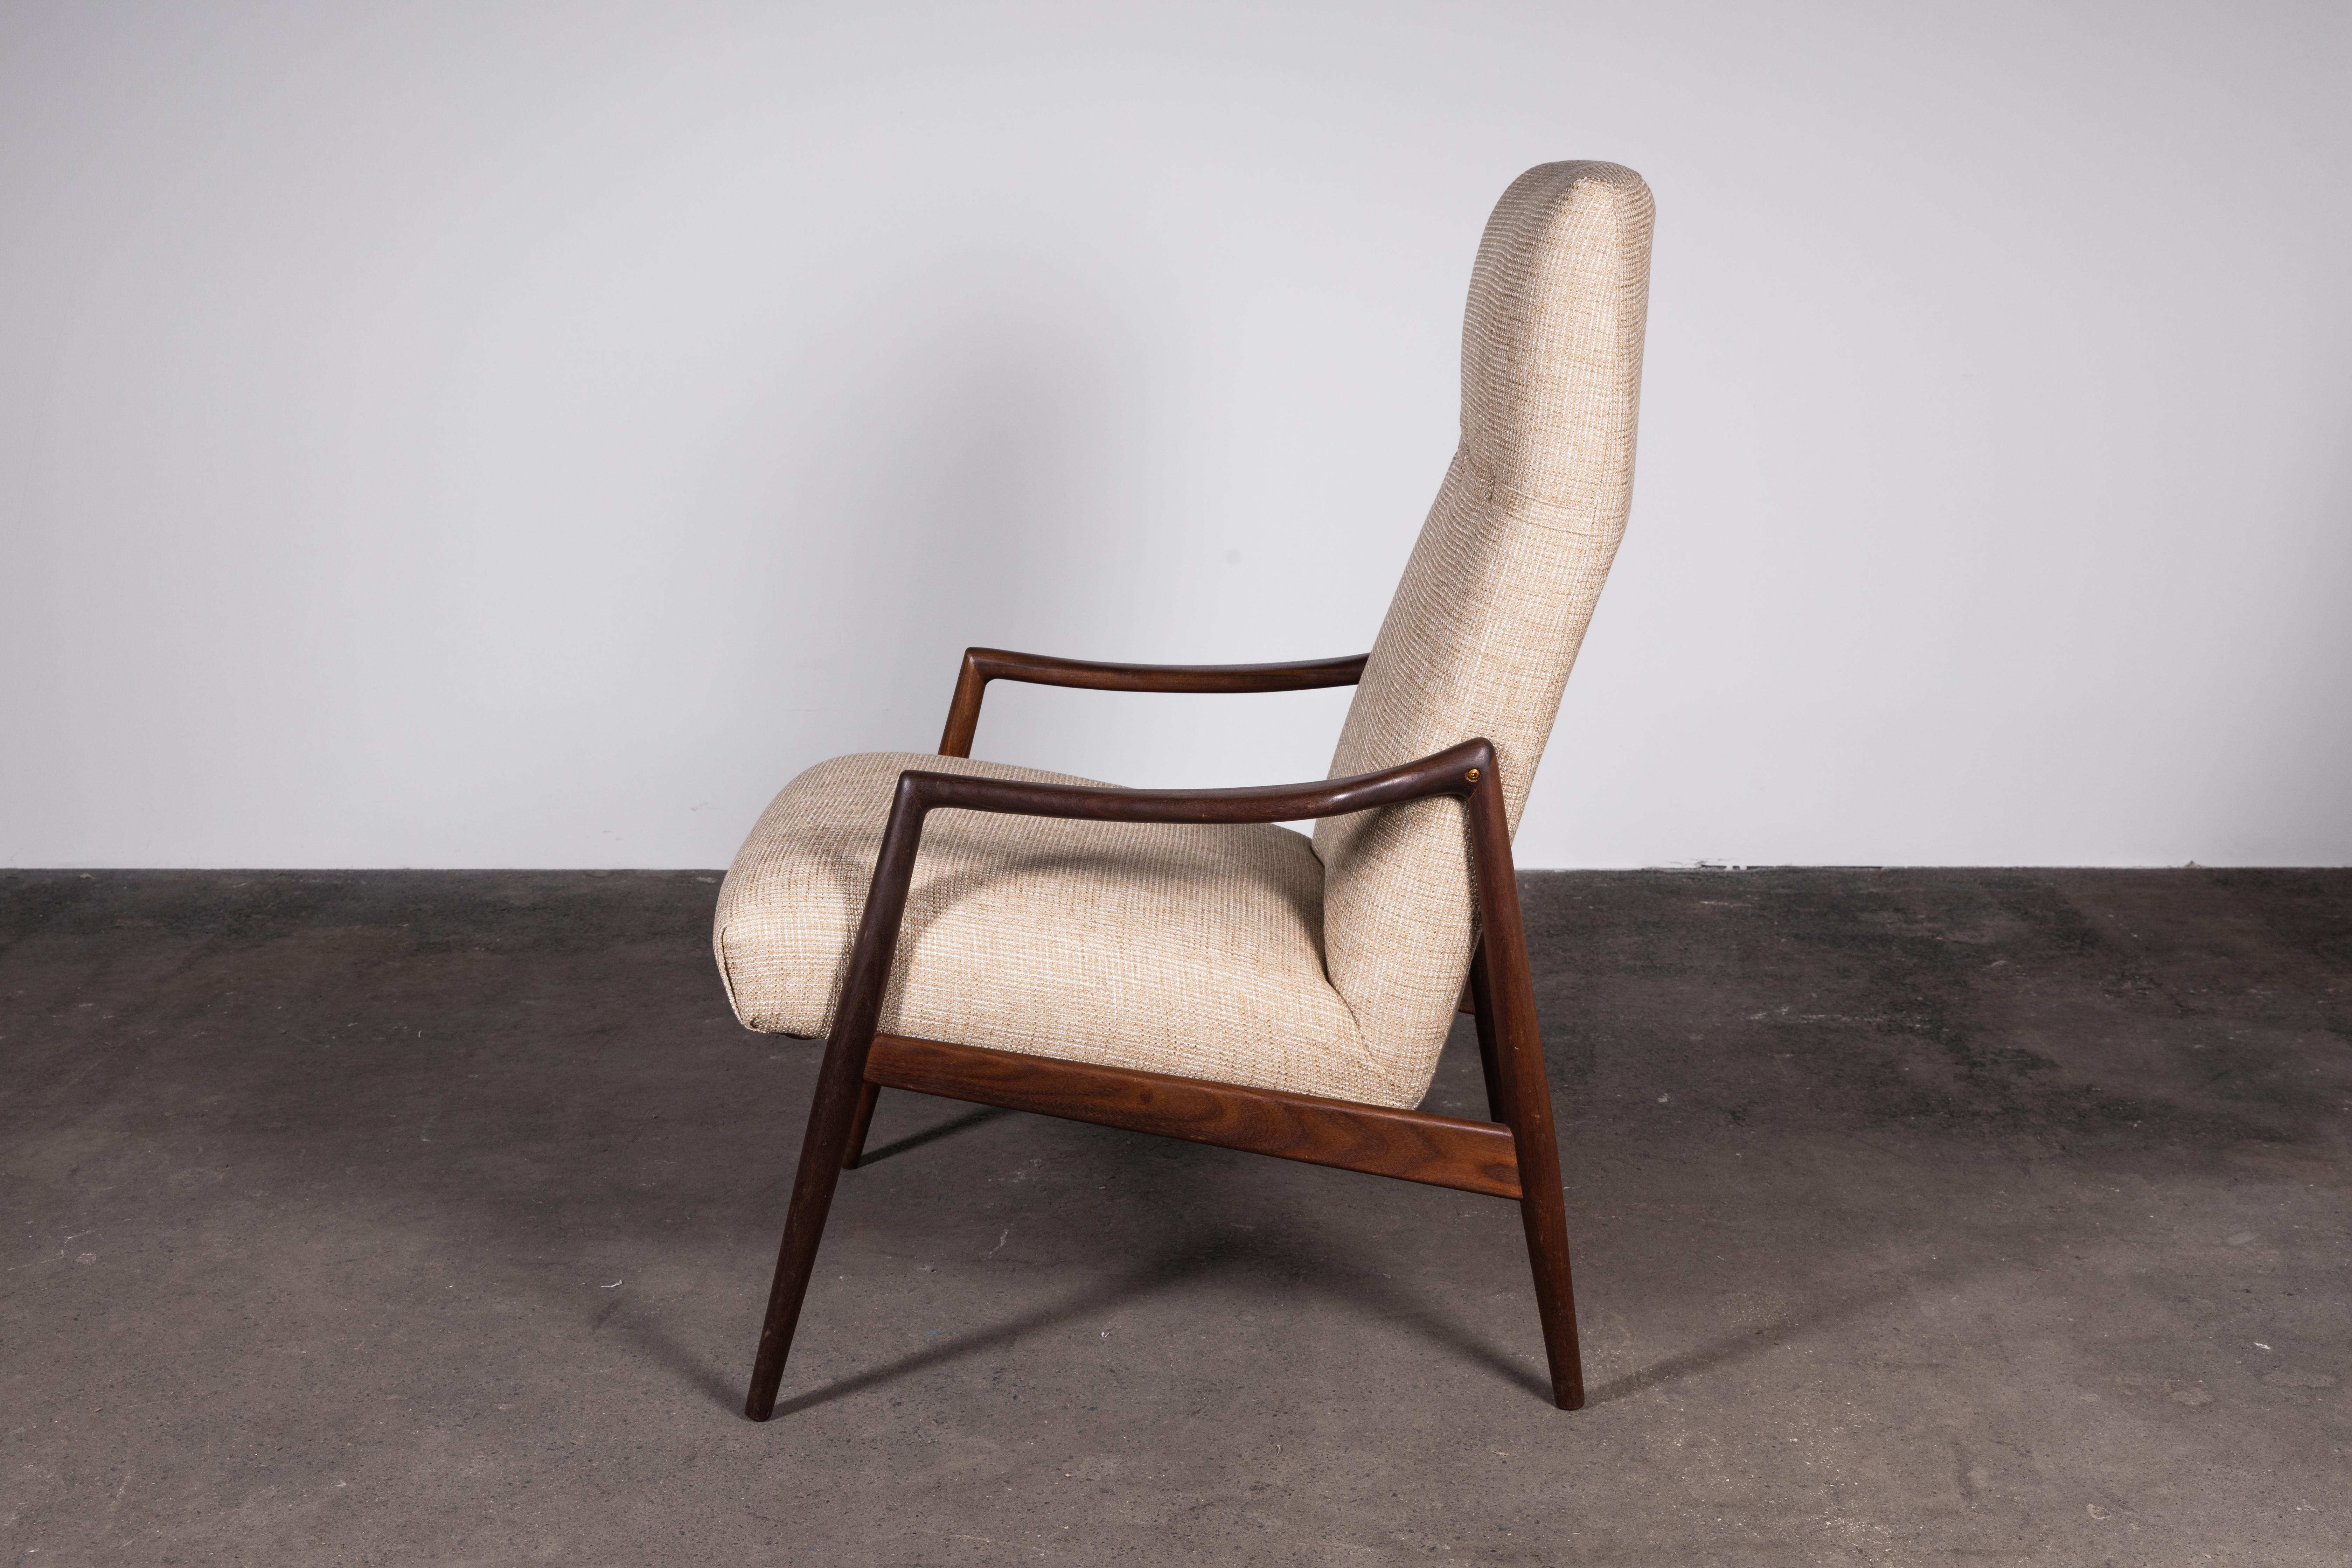 Ships from Kentucky USA.

The epitome of Mid-Century Modern refinement. This iconic high-back teak armchair represents some of the best design and craftsmanship of the era.

The sculpted teak wood, elegantly darkened with age, is complemented by